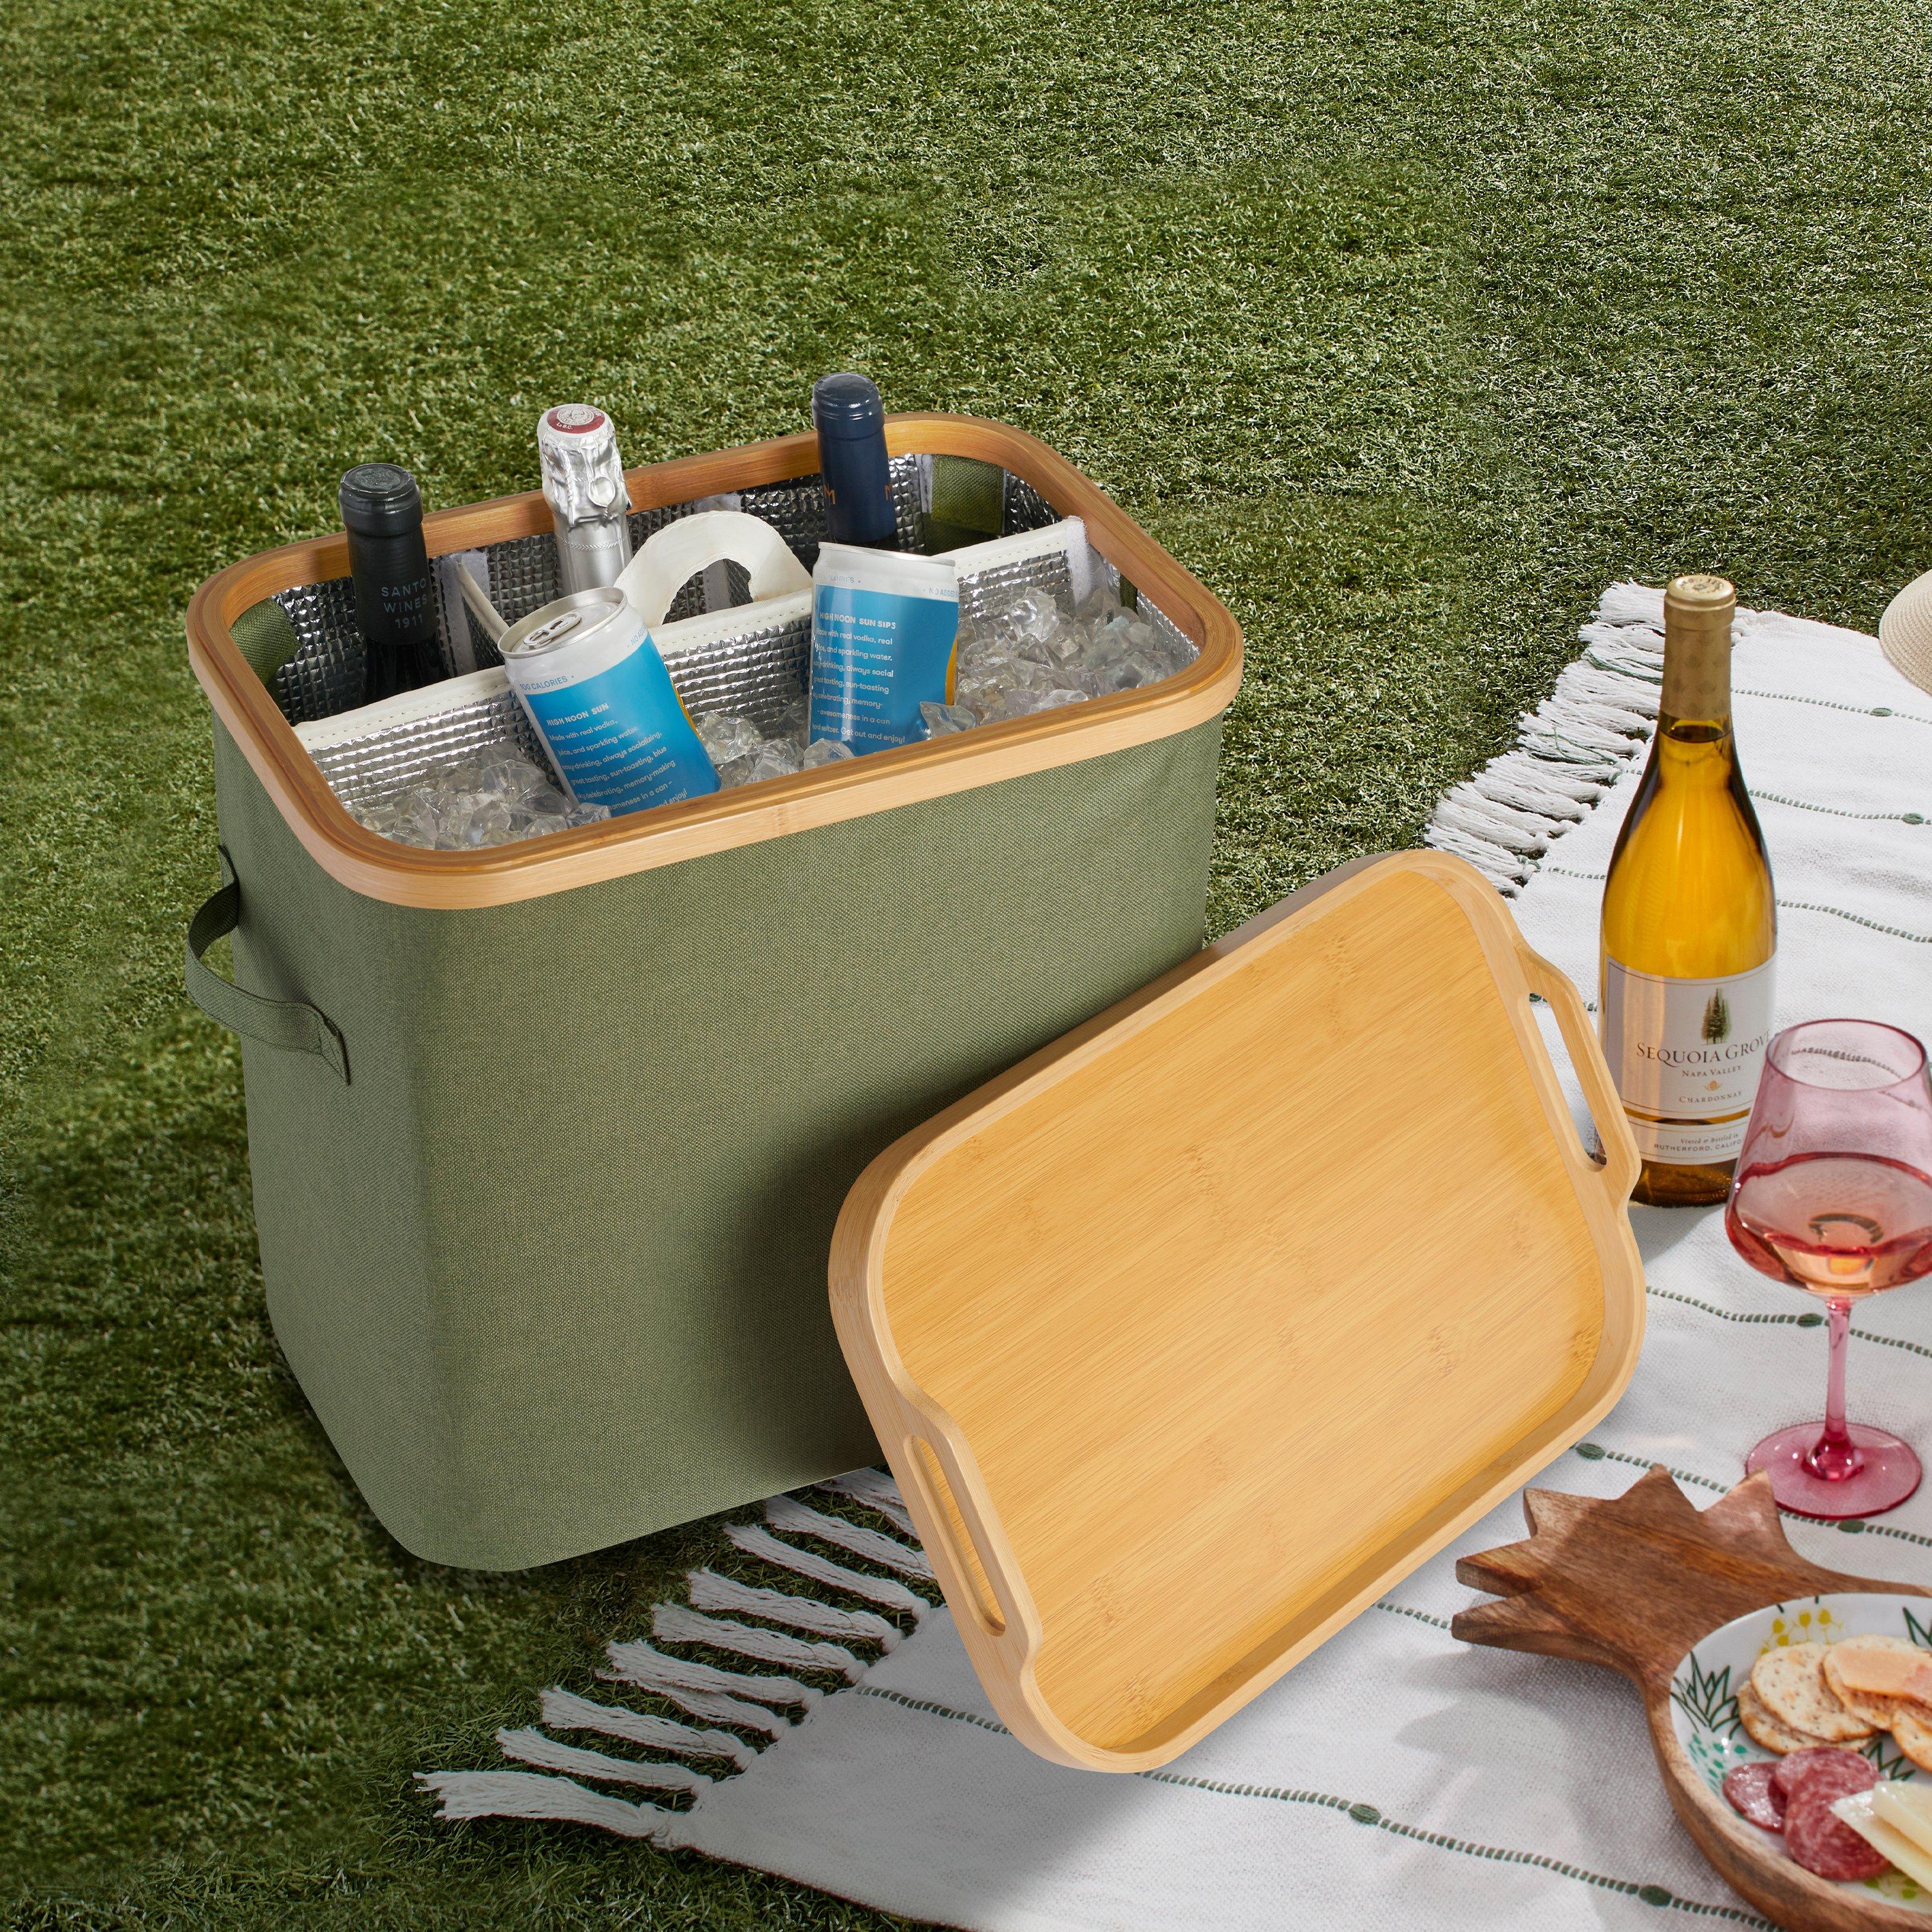 Deal of the Week! Side Table Cooler 30% Off